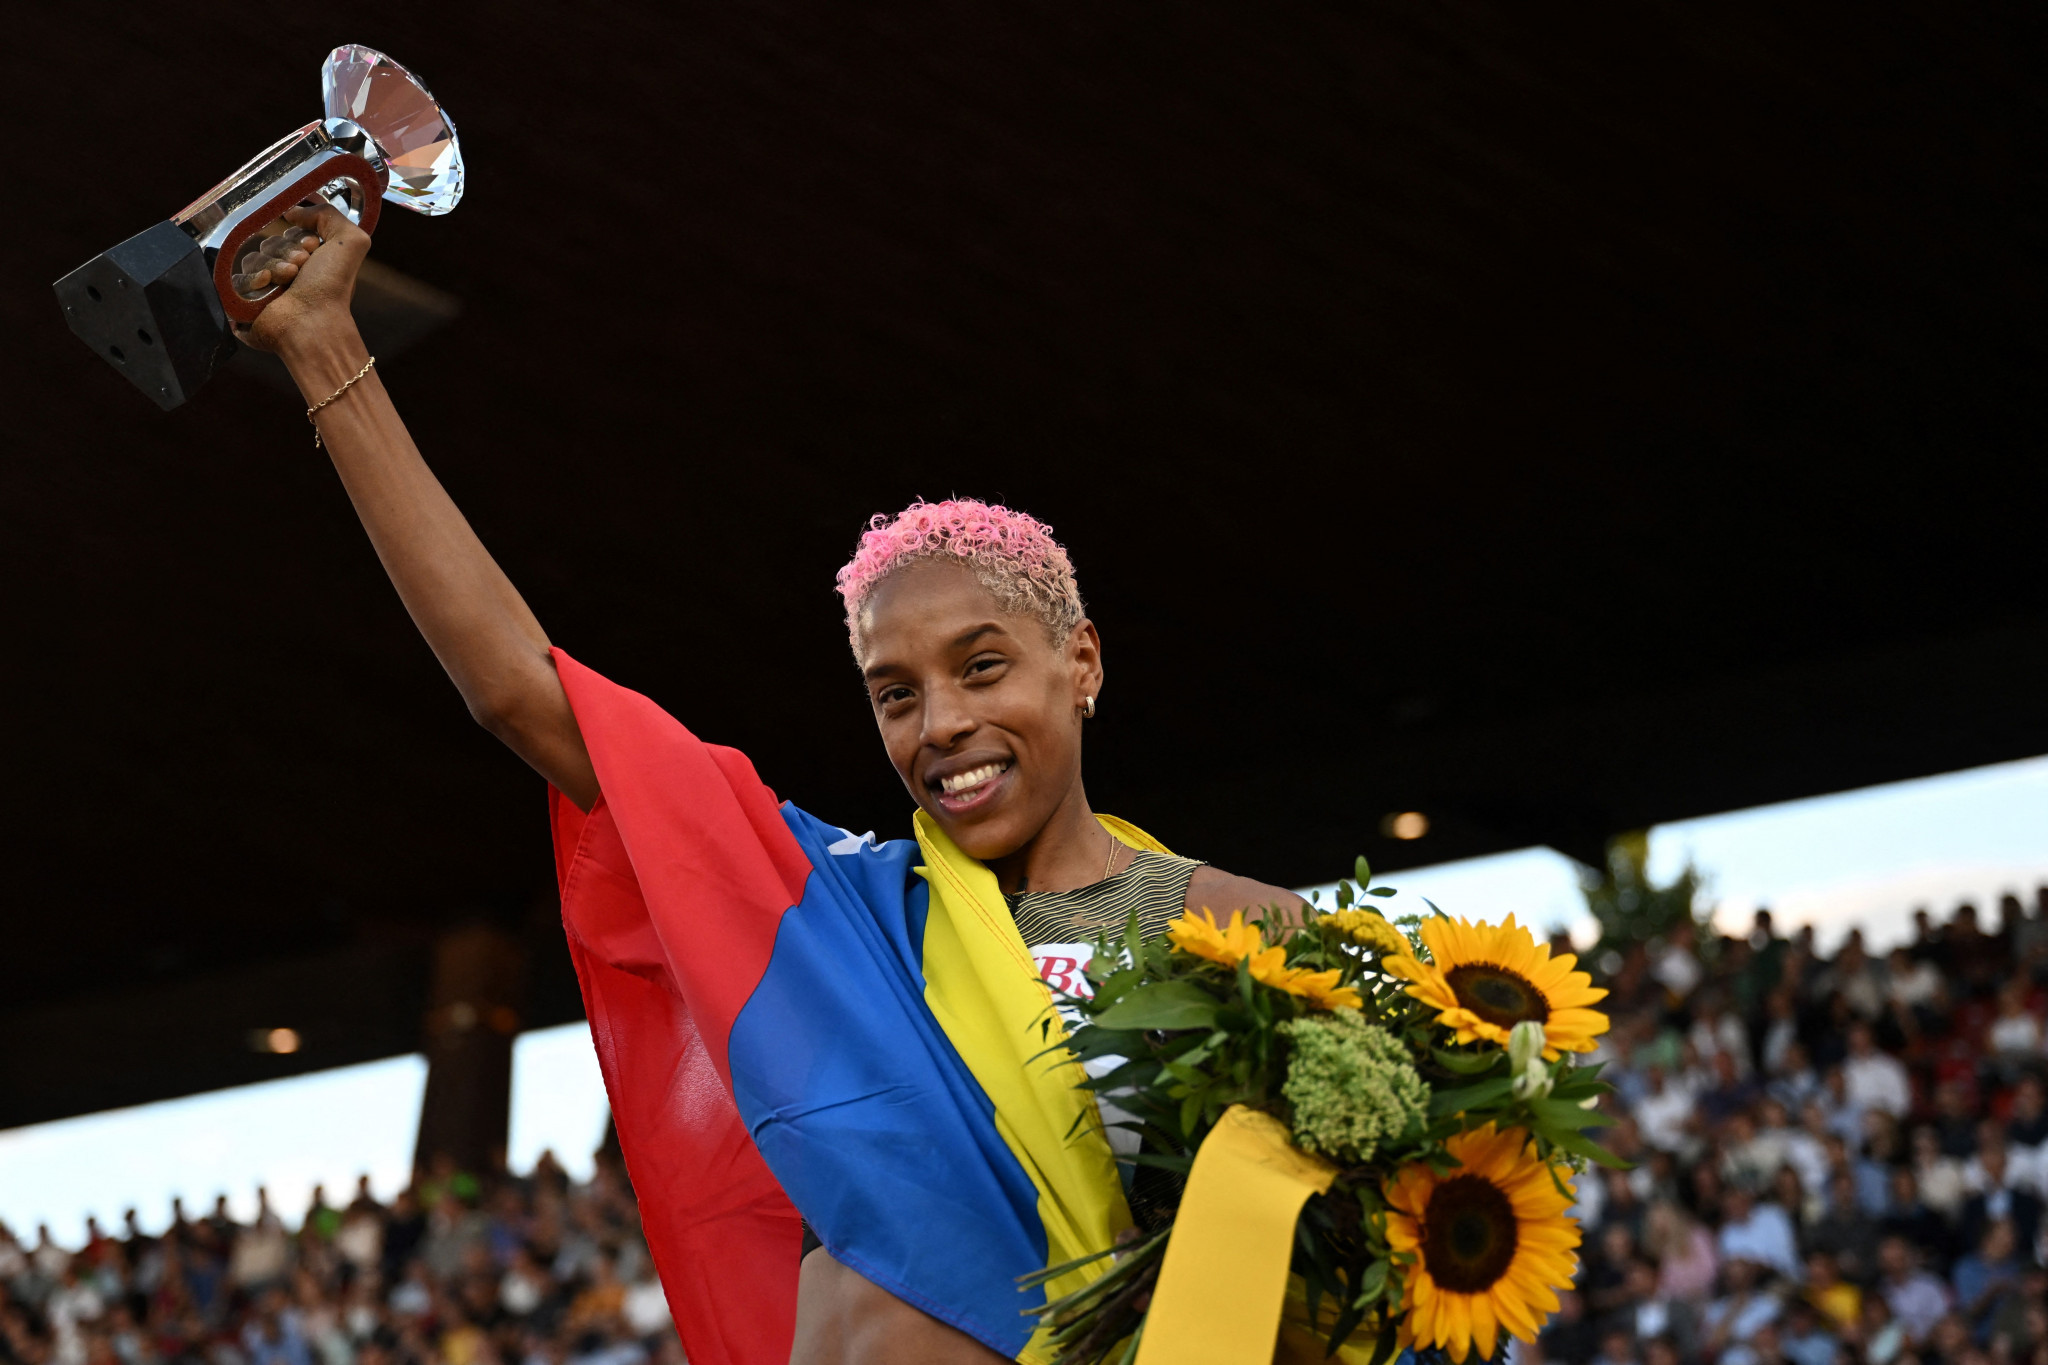 Yulimar Rojas won Olympic triple jump gold in Tokyo after setting a world record ©Getty Images